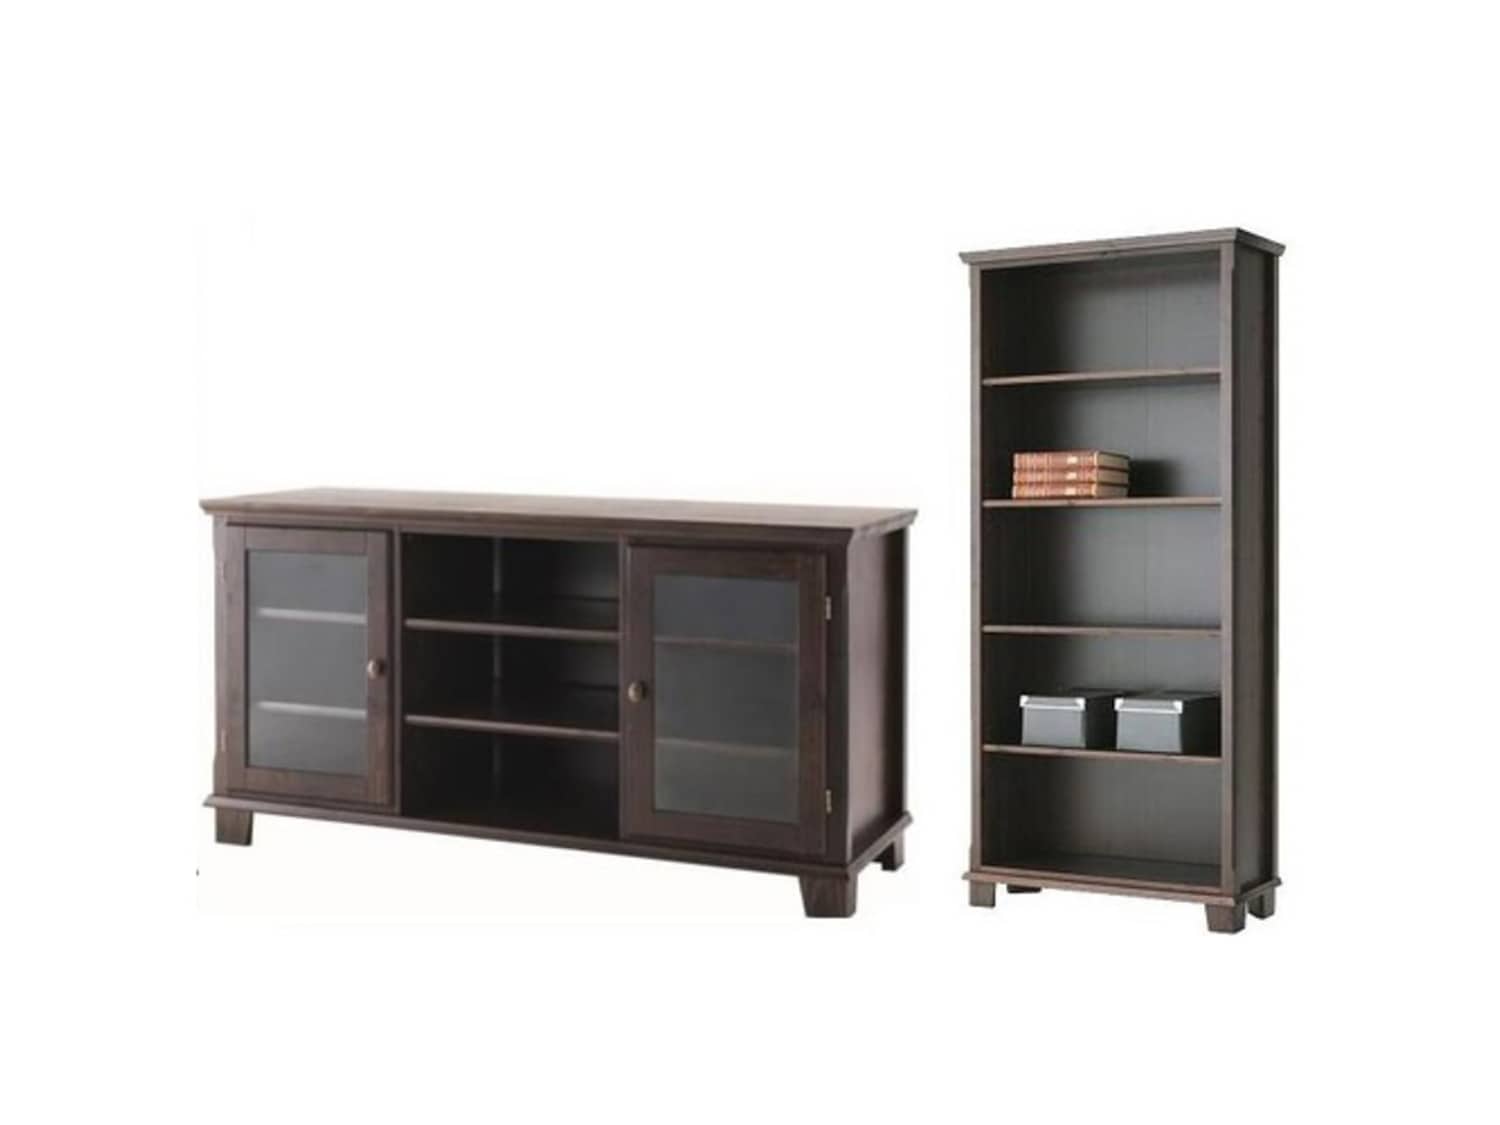 Ikea Markor Tv Bench And Bookcase Bookshelf Apartment Therapy S